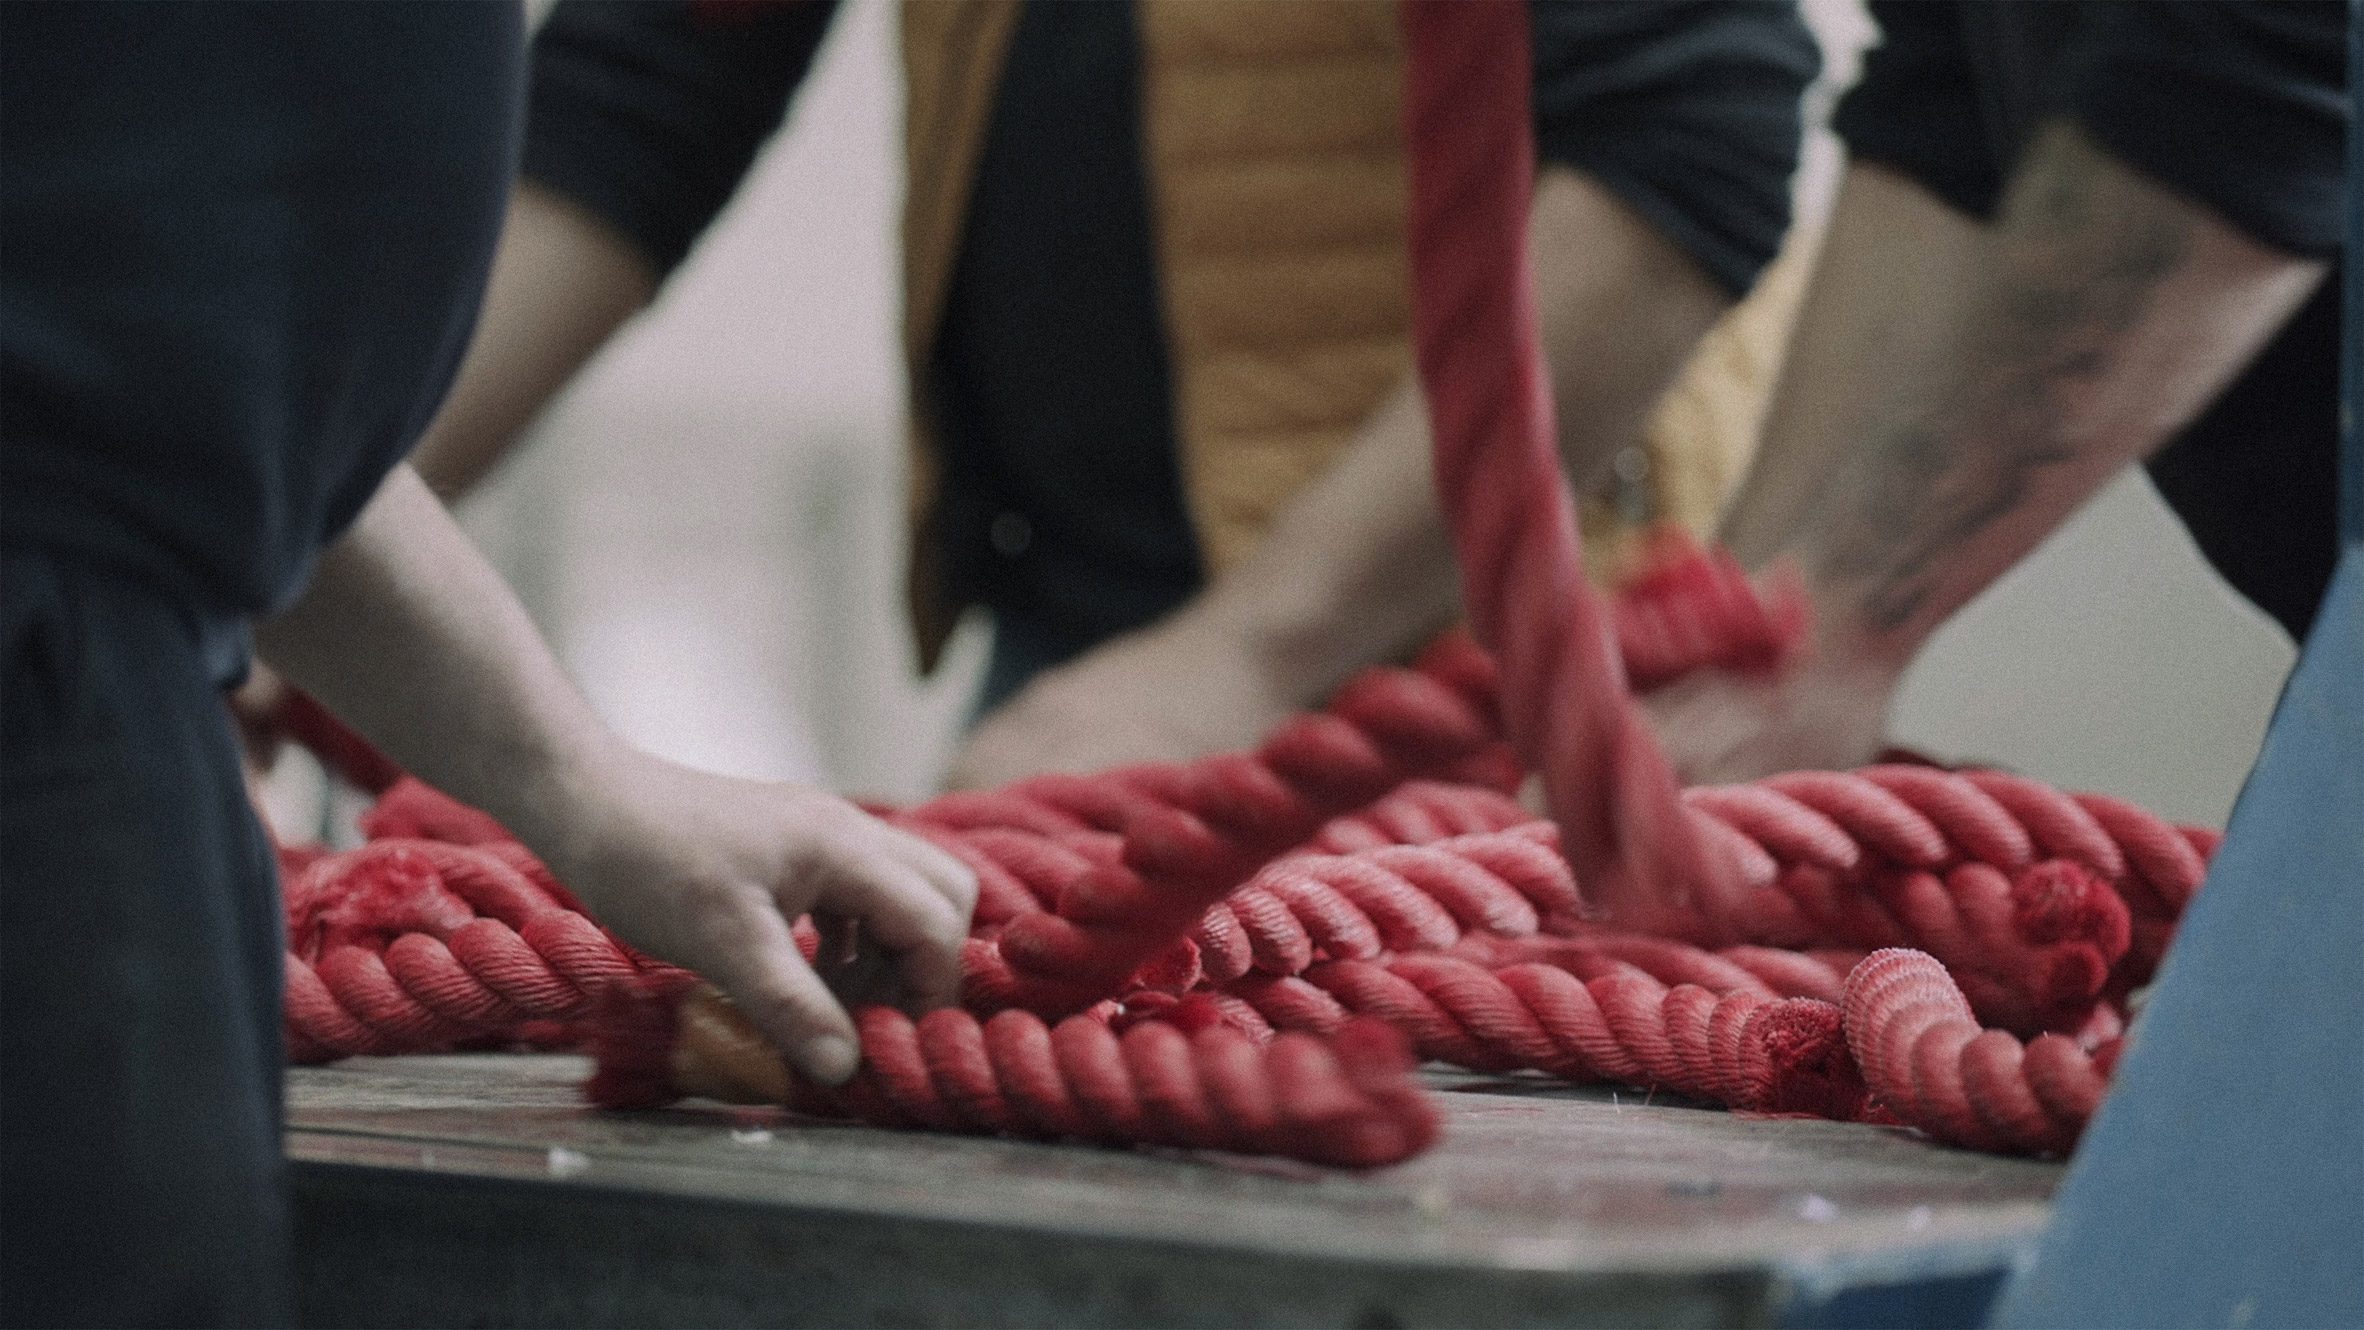 Photo of three sets of arms handling red ropes on a metal table